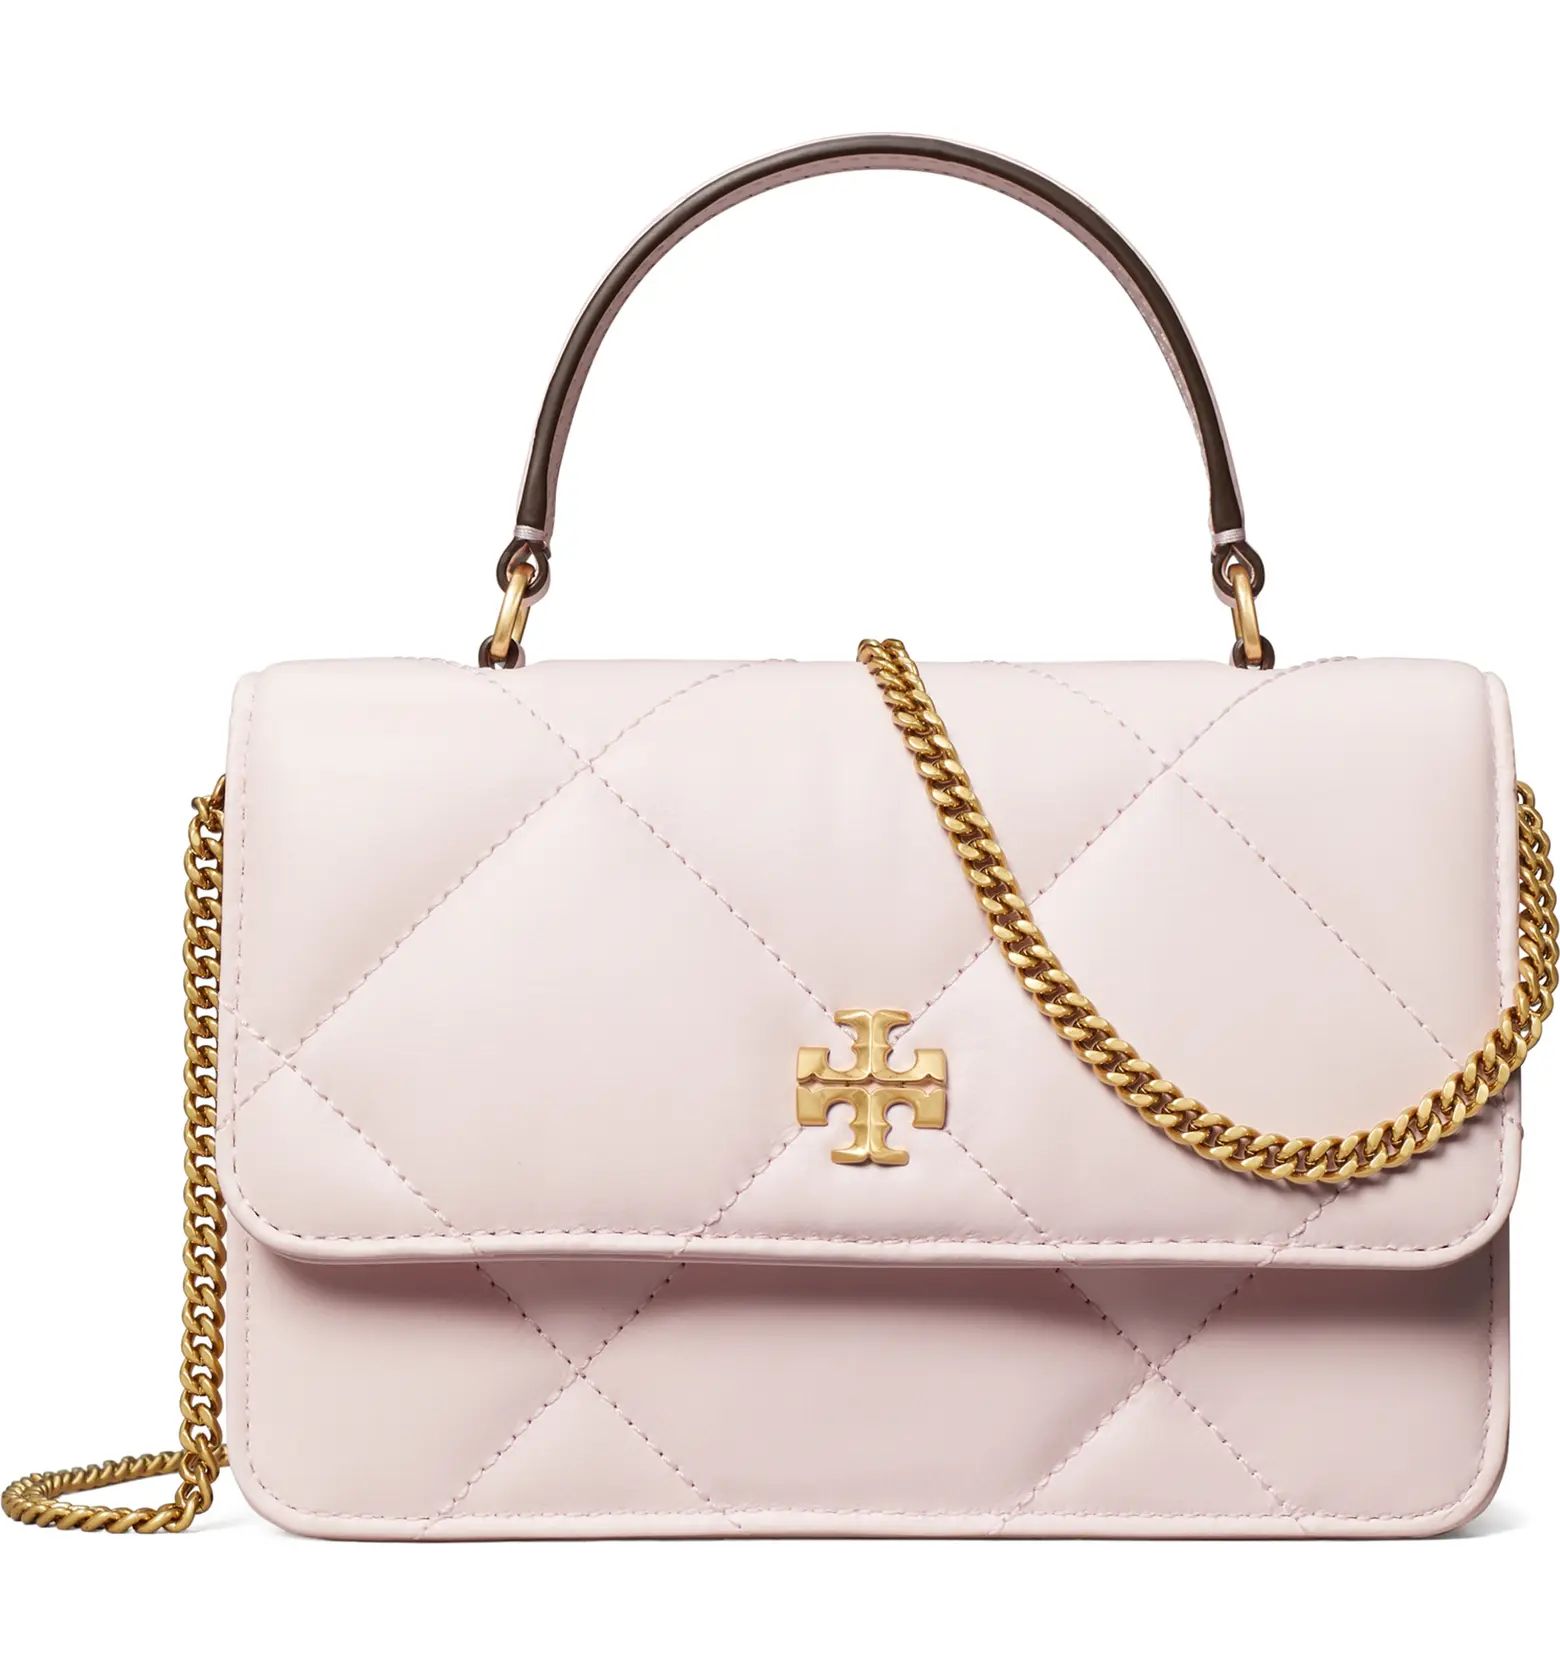 Tory Burch Mini Kira Diamond Quilted Leather Top Handle Bag | Nordstrom | Nordstrom